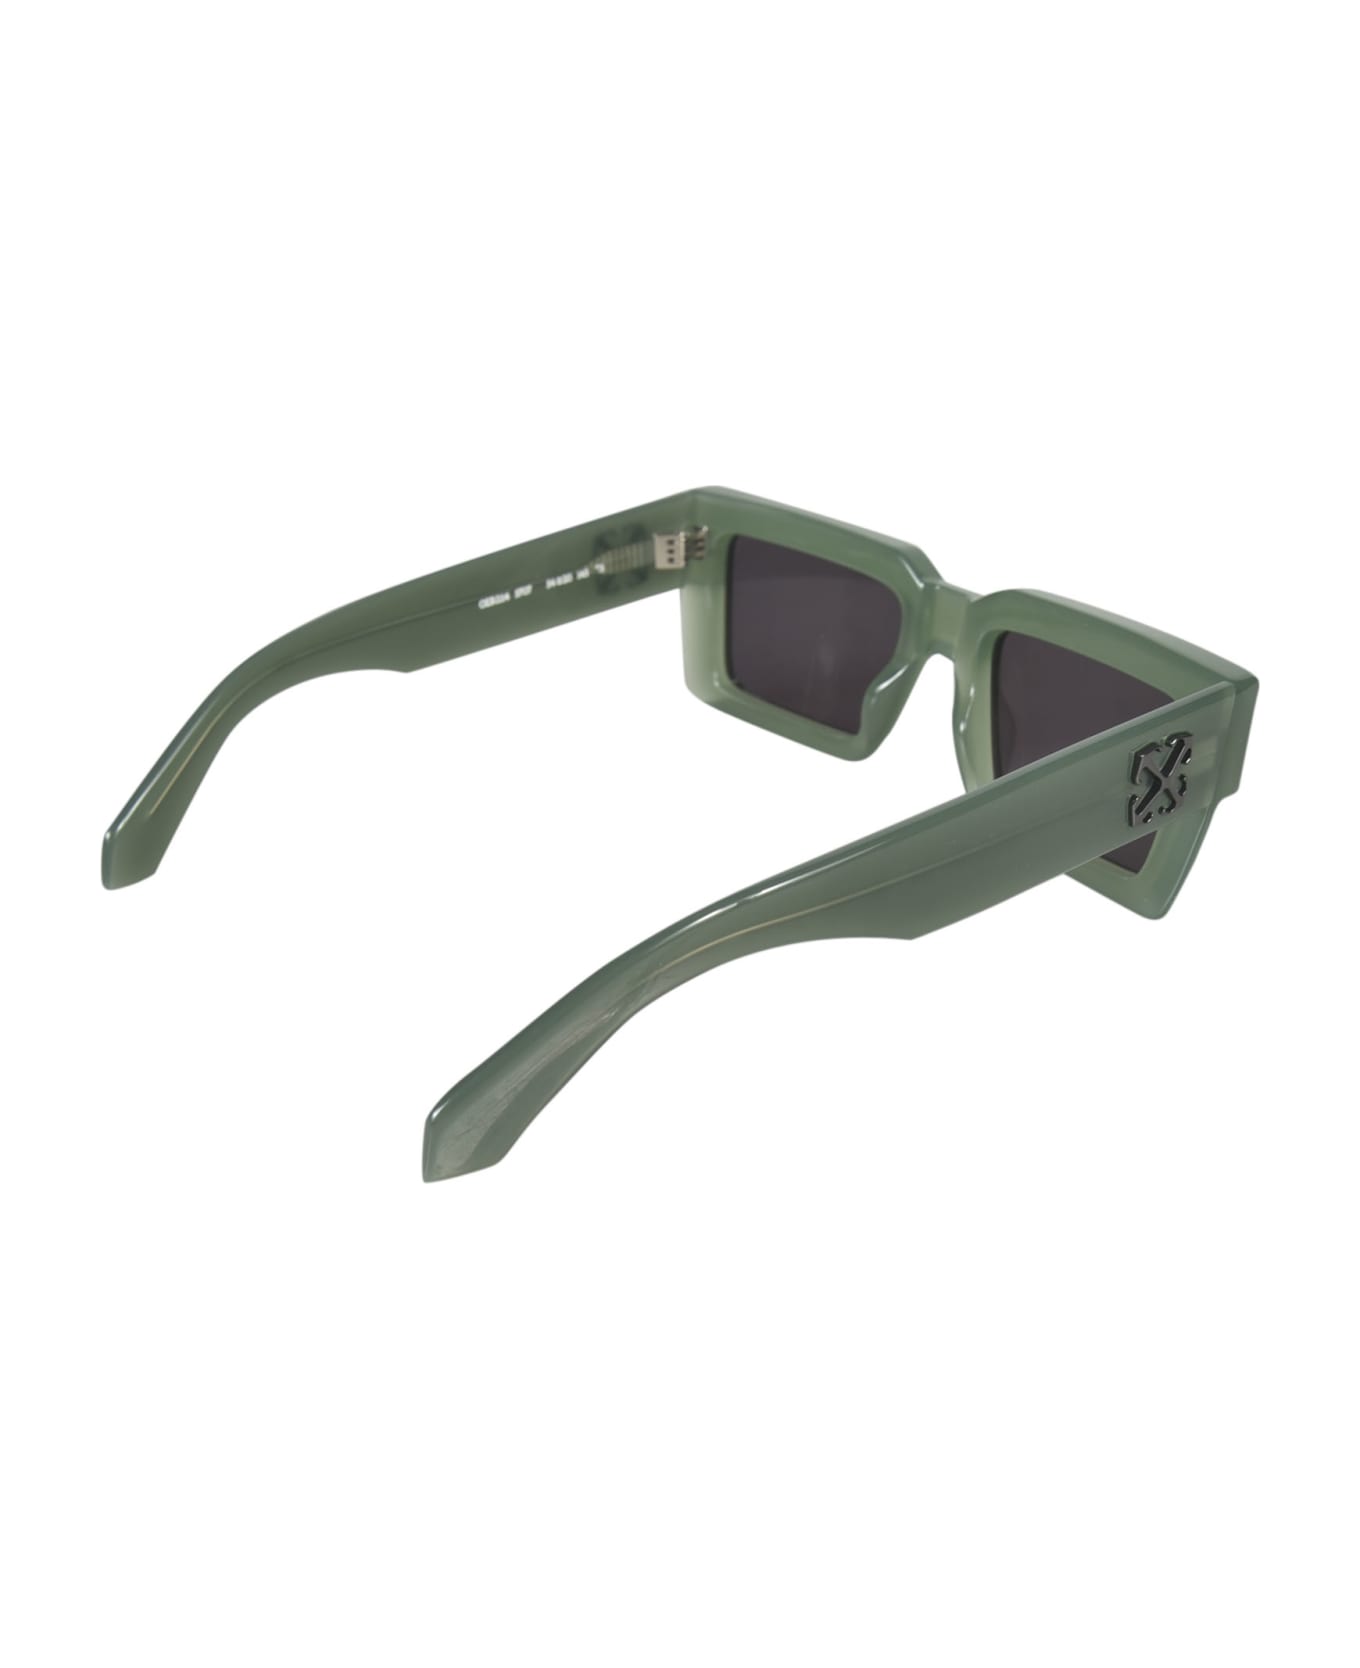 Off-White Moberly Sunglasses - Olive Green サングラス